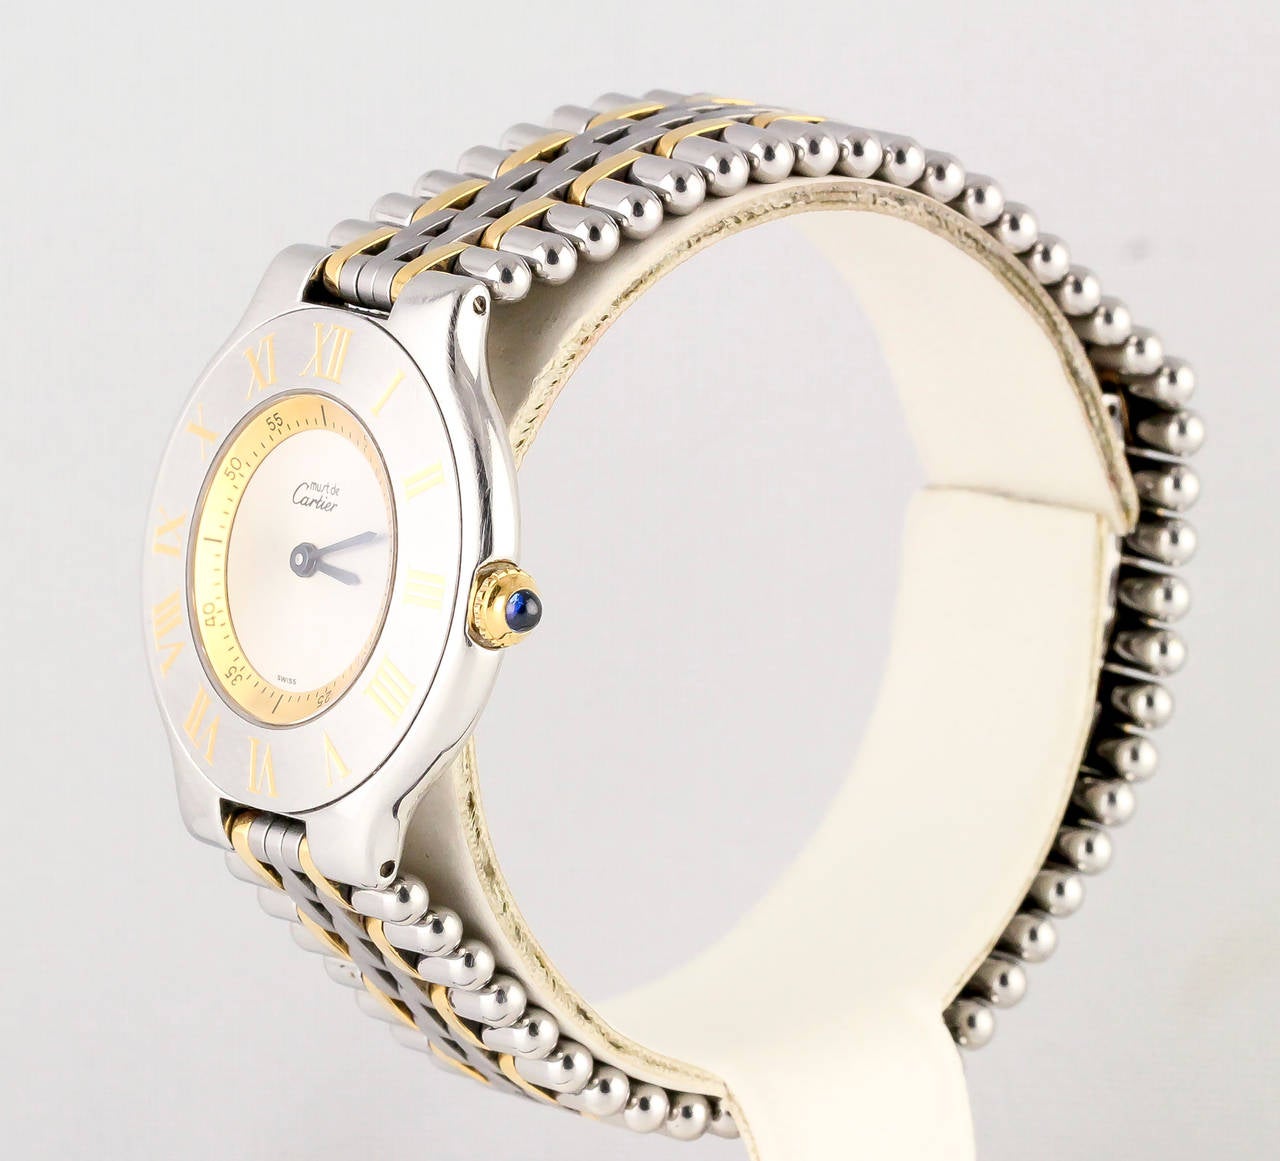 Classic 18K gold plated and stainless steel wrist watch from the 